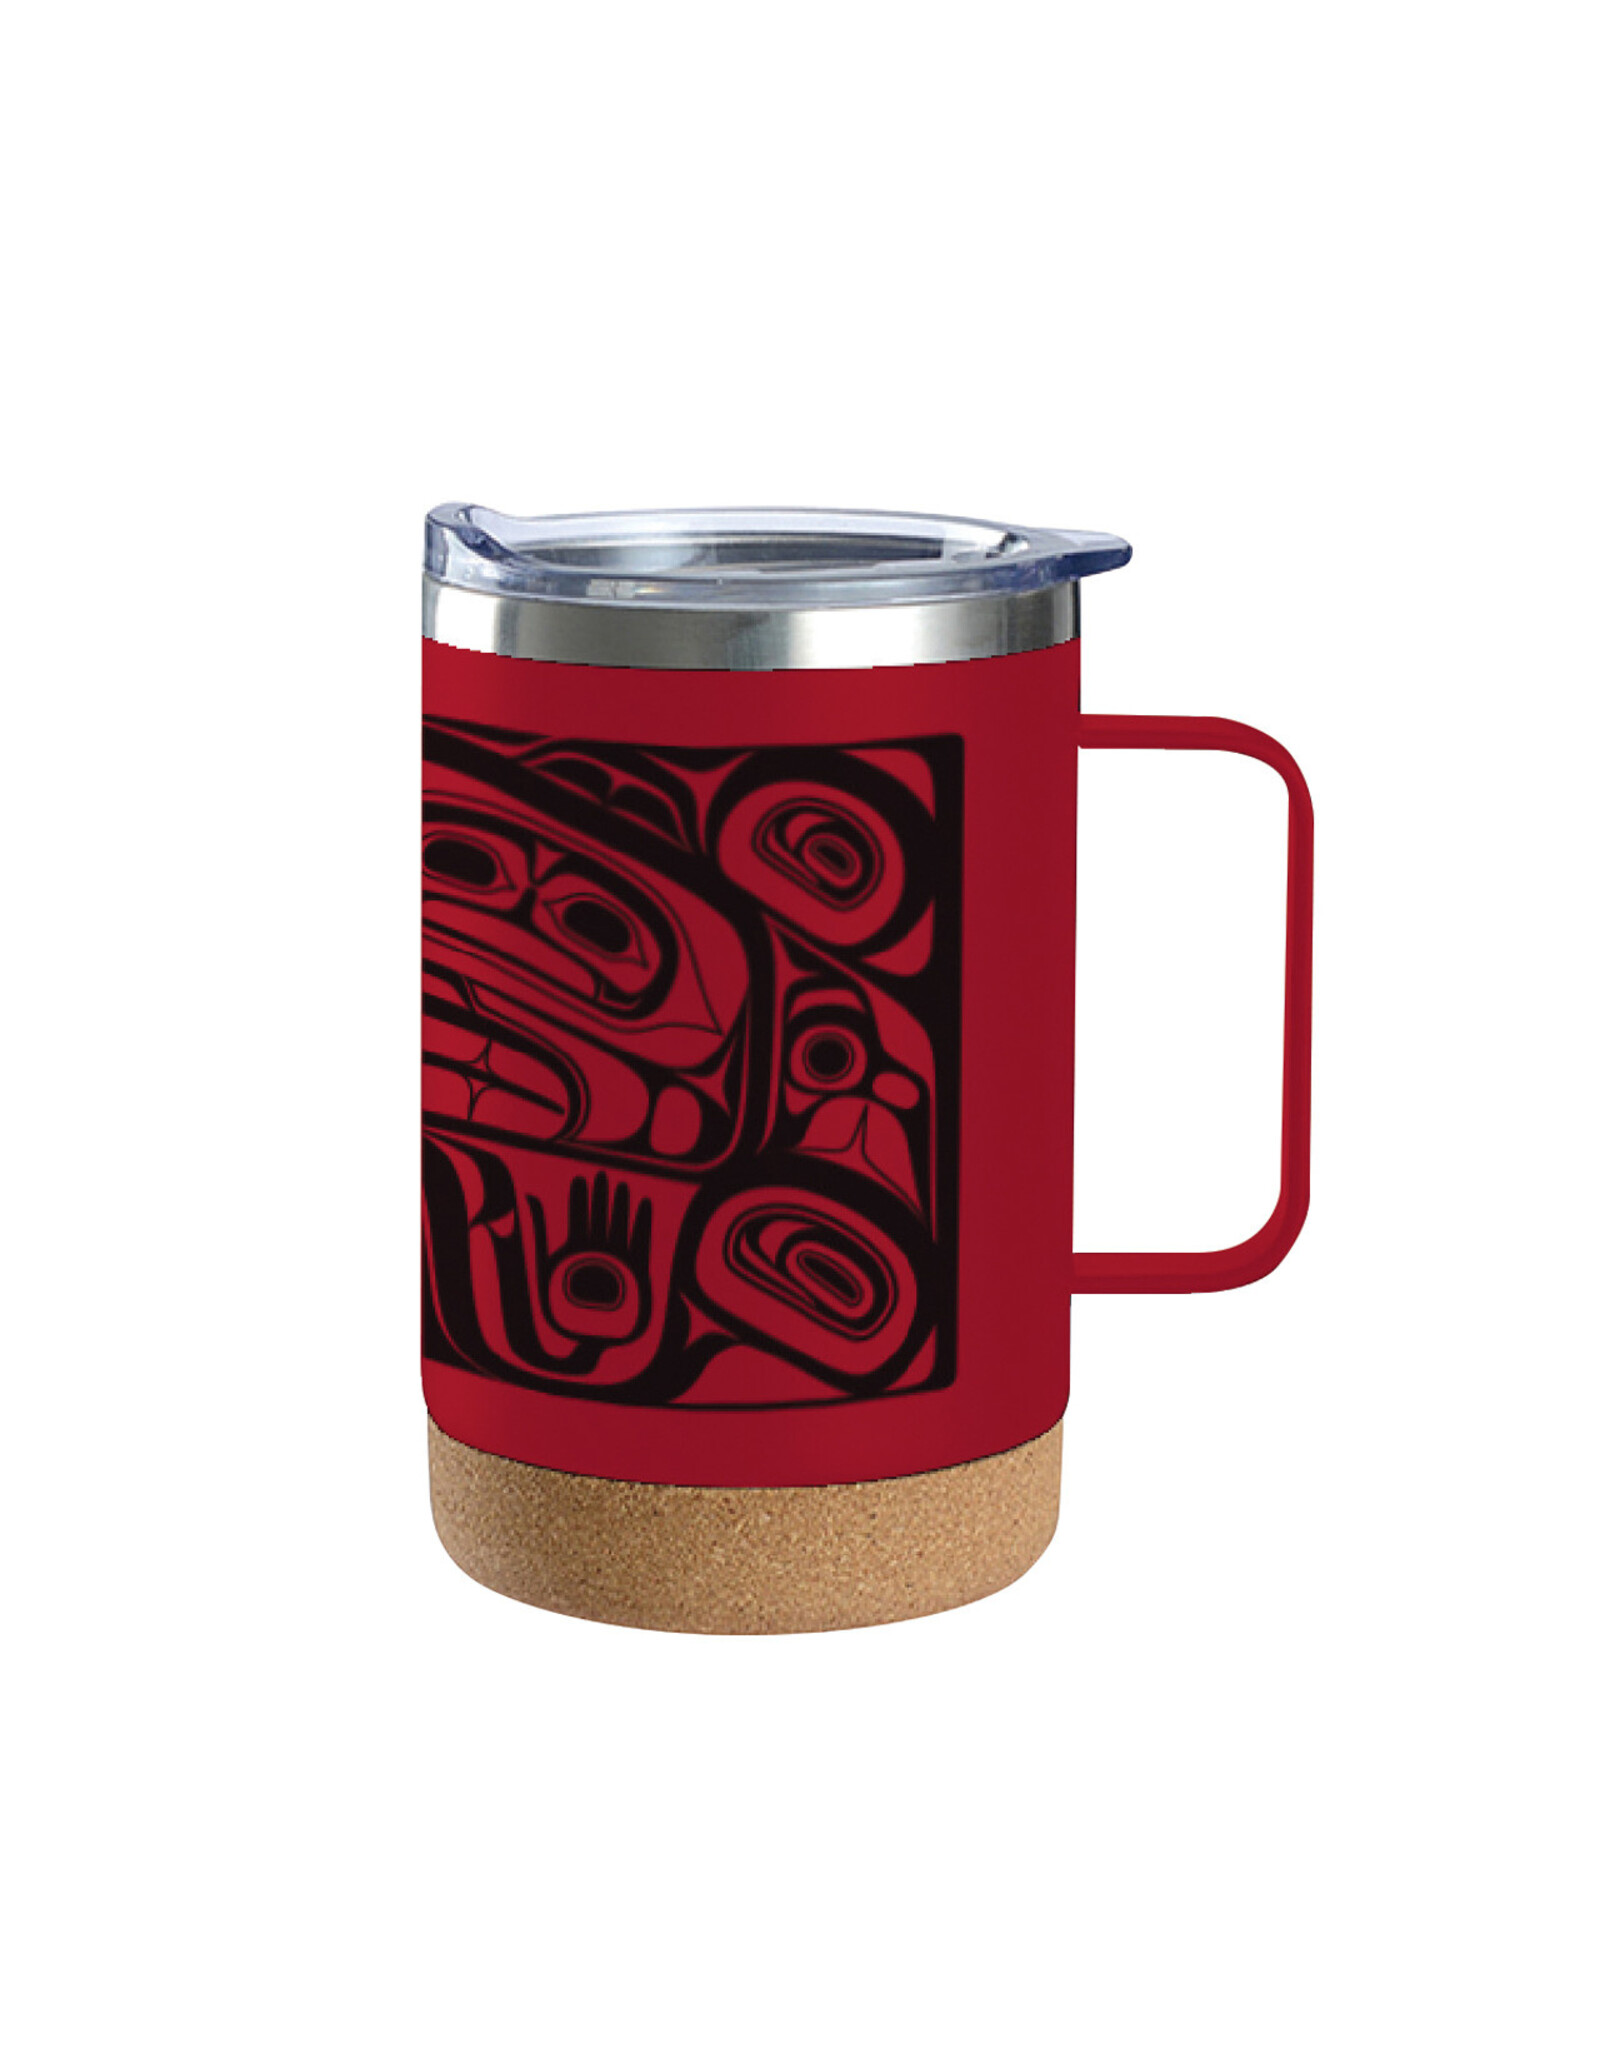 Cork Base Travel Mug with Handle - Treasure of our Ancestors by Donnie Edenshaw